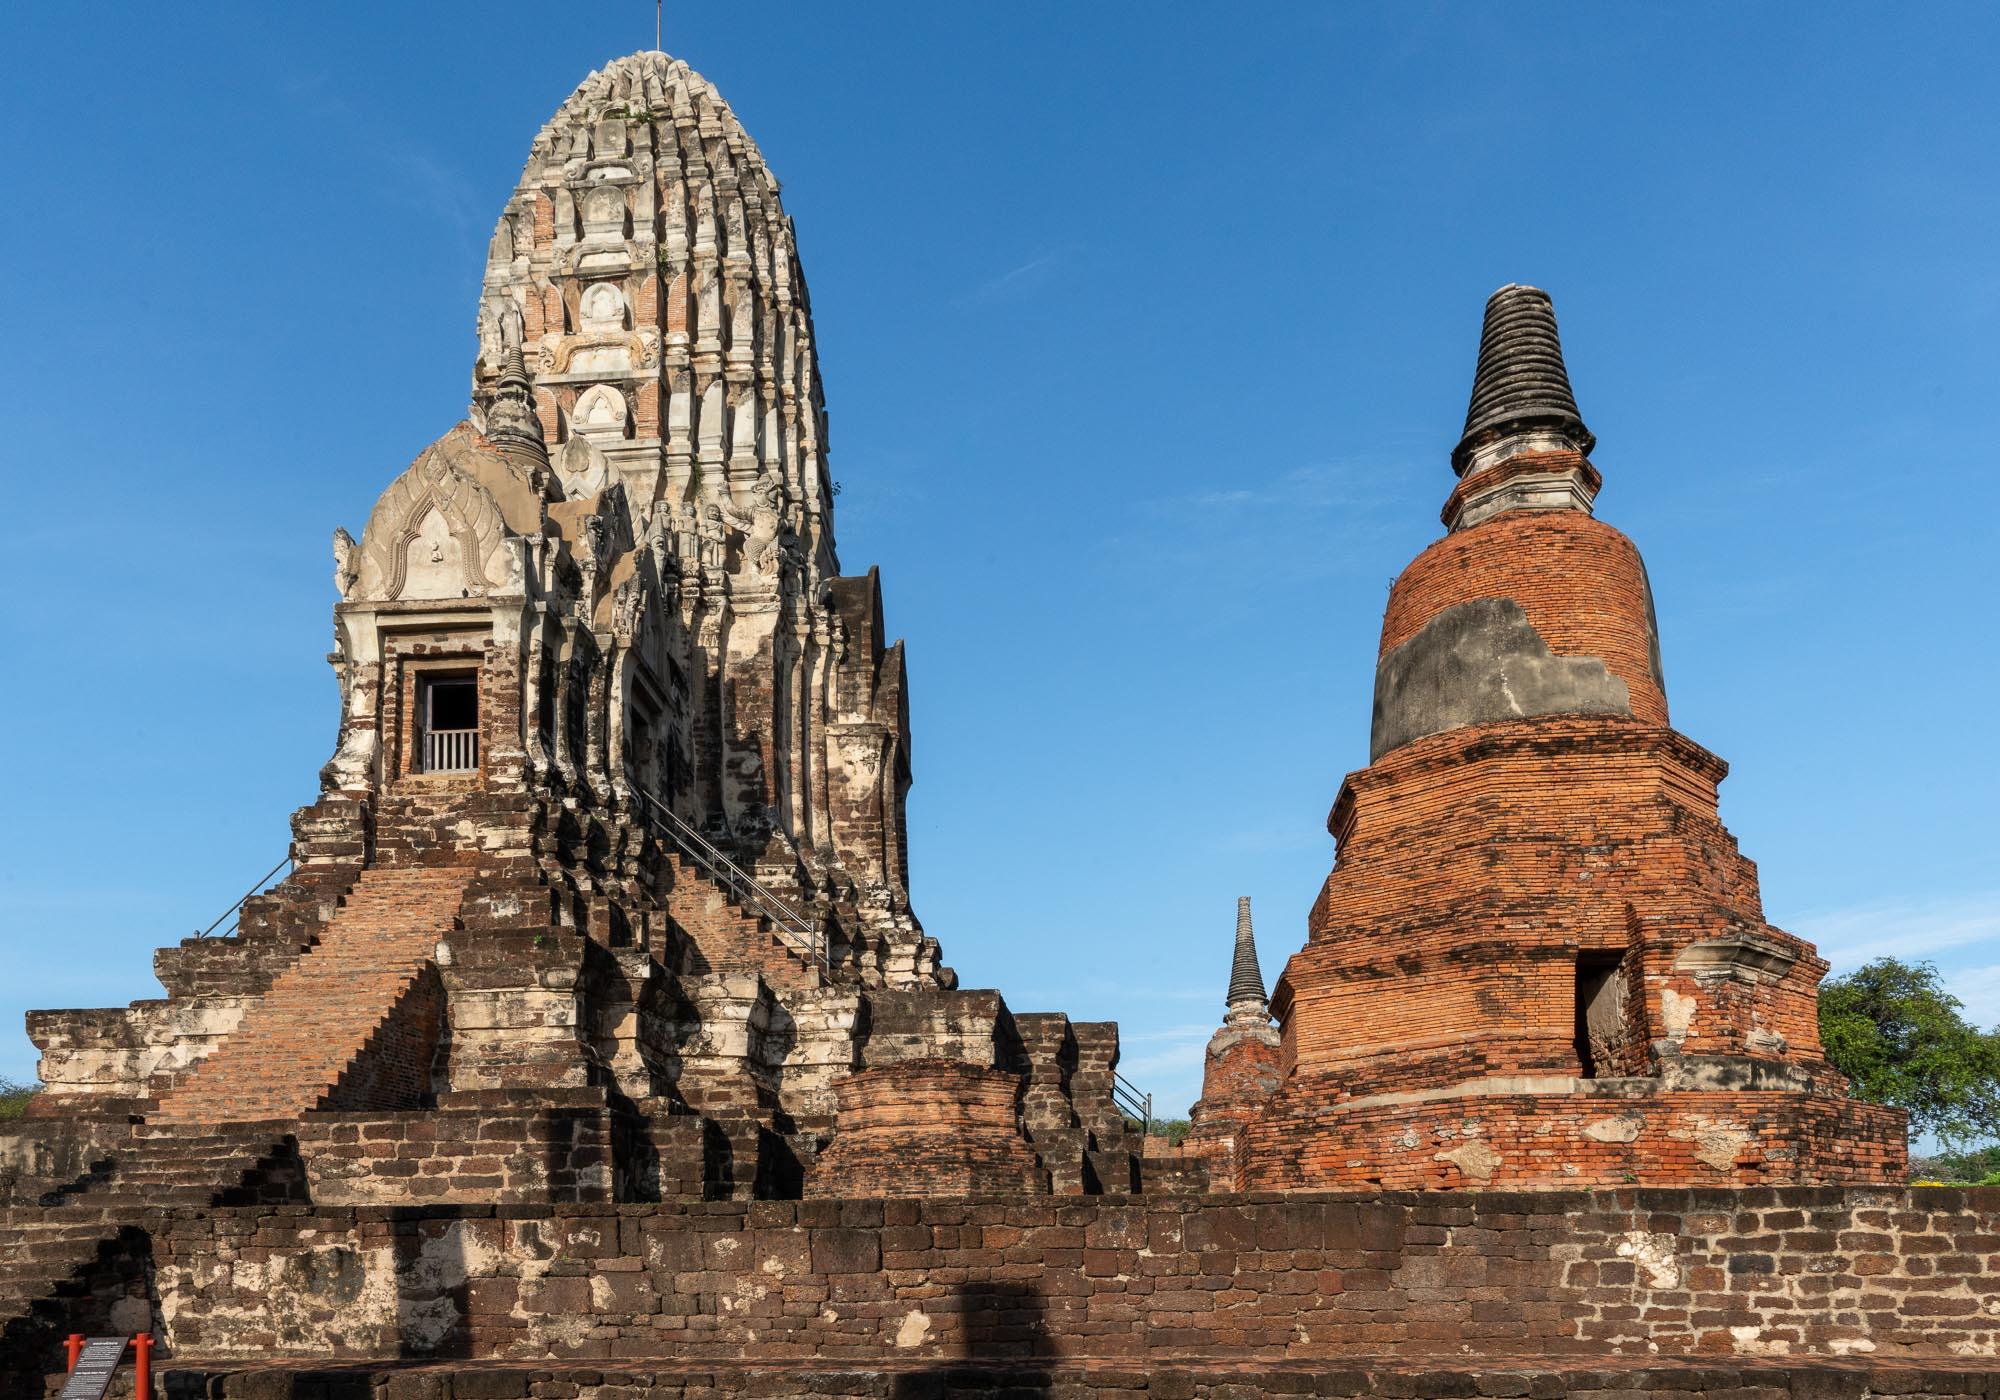 Smaller stupas were built for merit around the central tower. – © Michael Turtle